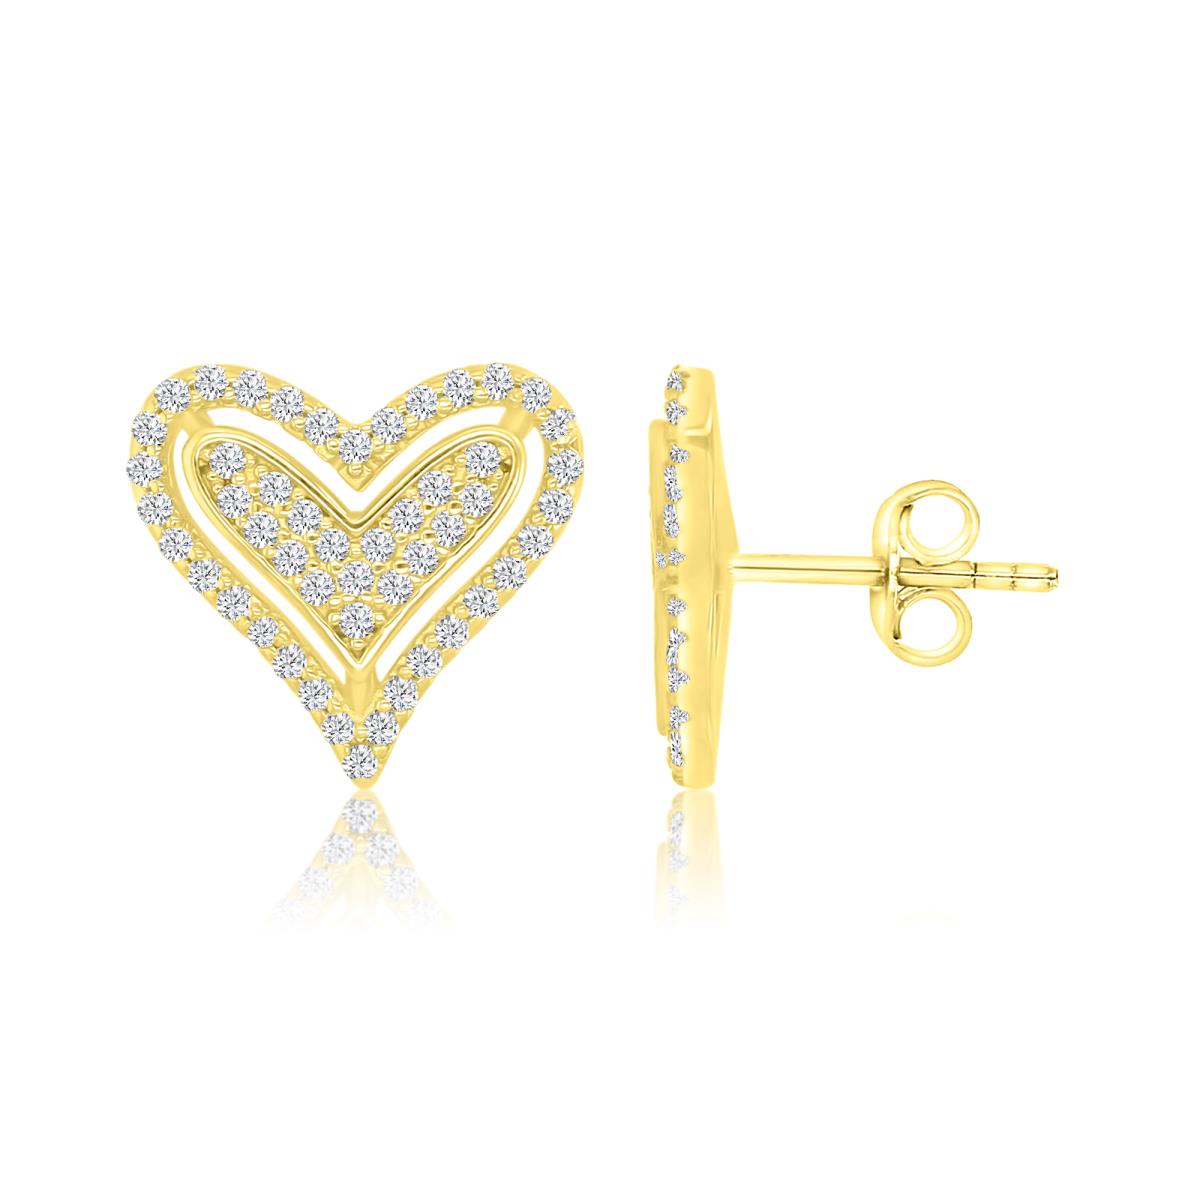 Sterling Silver Yellow 12x13mm White CZ Pave Heart Stud Earrings